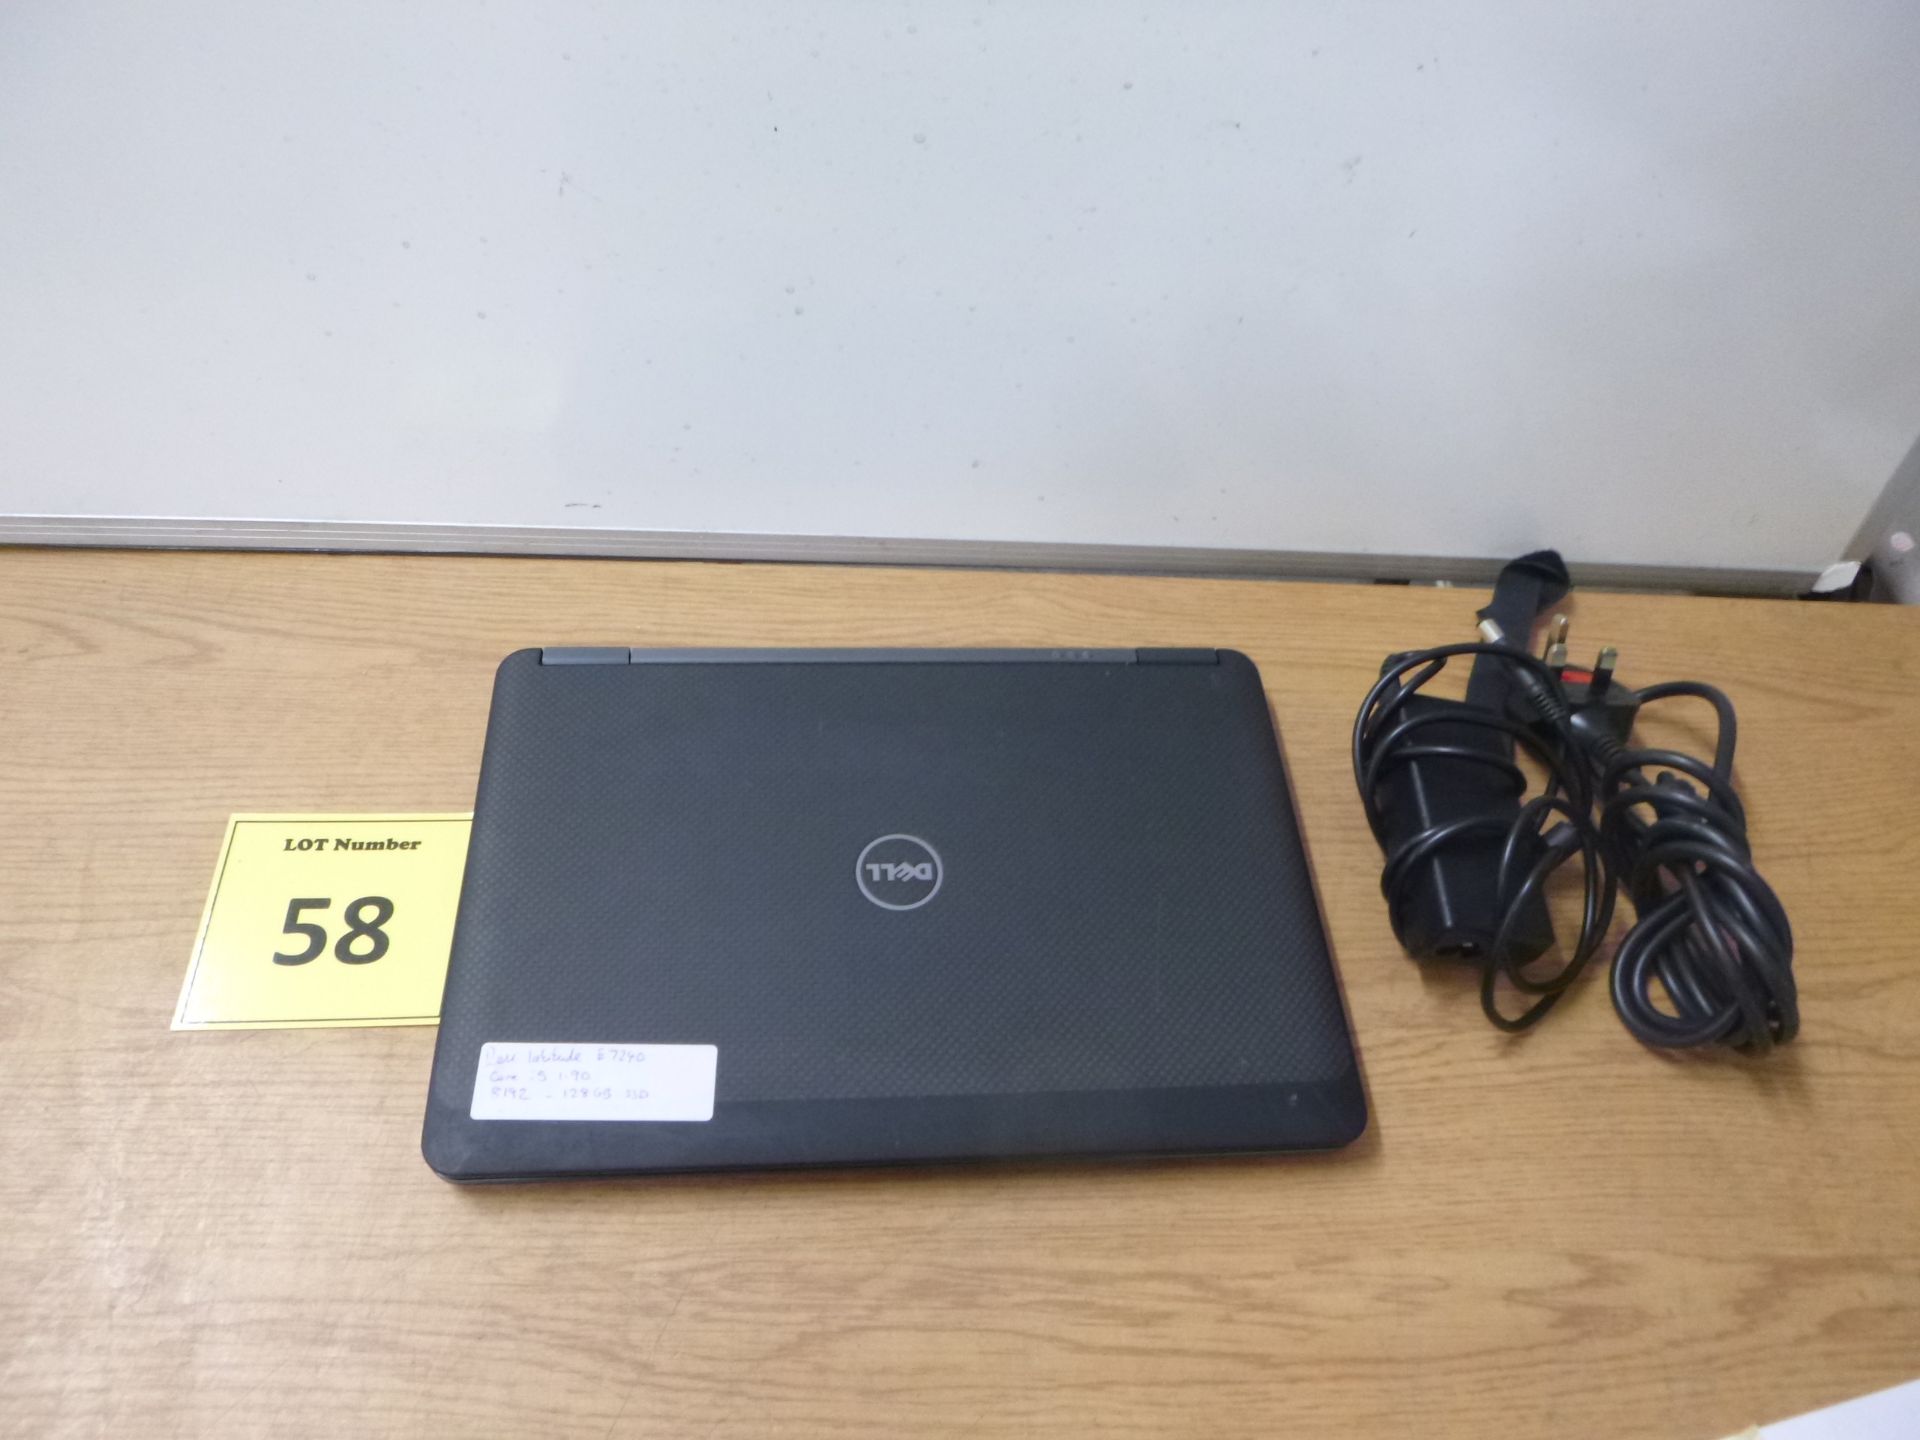 DELL LATITUDE E7240 LAPTOP. CORE i5 1.9 GHZ PROCESSOR, 8GB RAM, 128GB SOLID STATE HDD. WITH PSU & W8 - Image 2 of 2